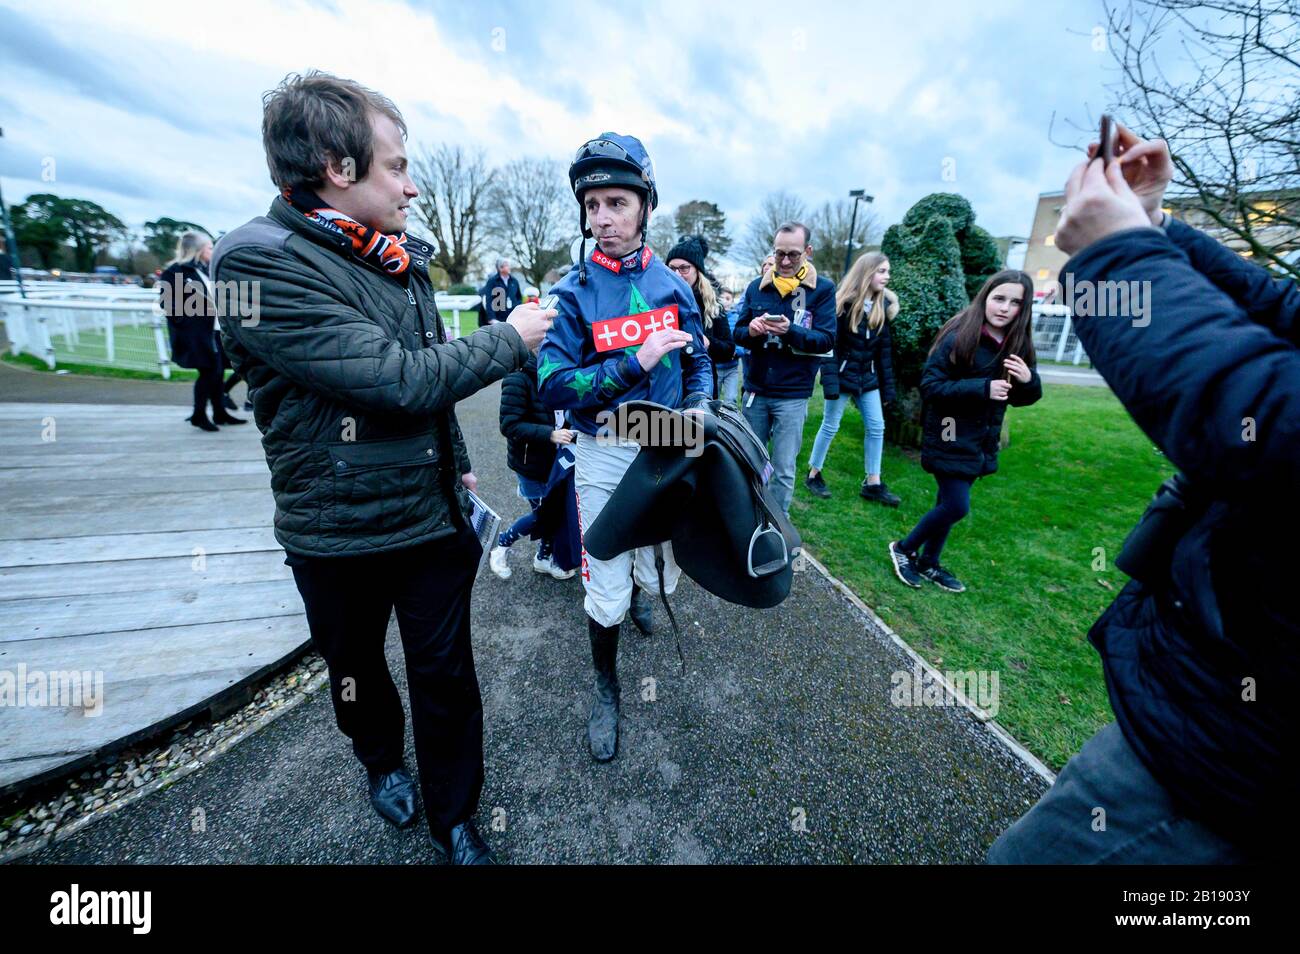 Jockety Leighton Aspell at Fontwell racecourse todayt, Sussex, UK. Her announced he is retiring after today. Darren Cool - 07792308722 - www.dcoolimag Stock Photo